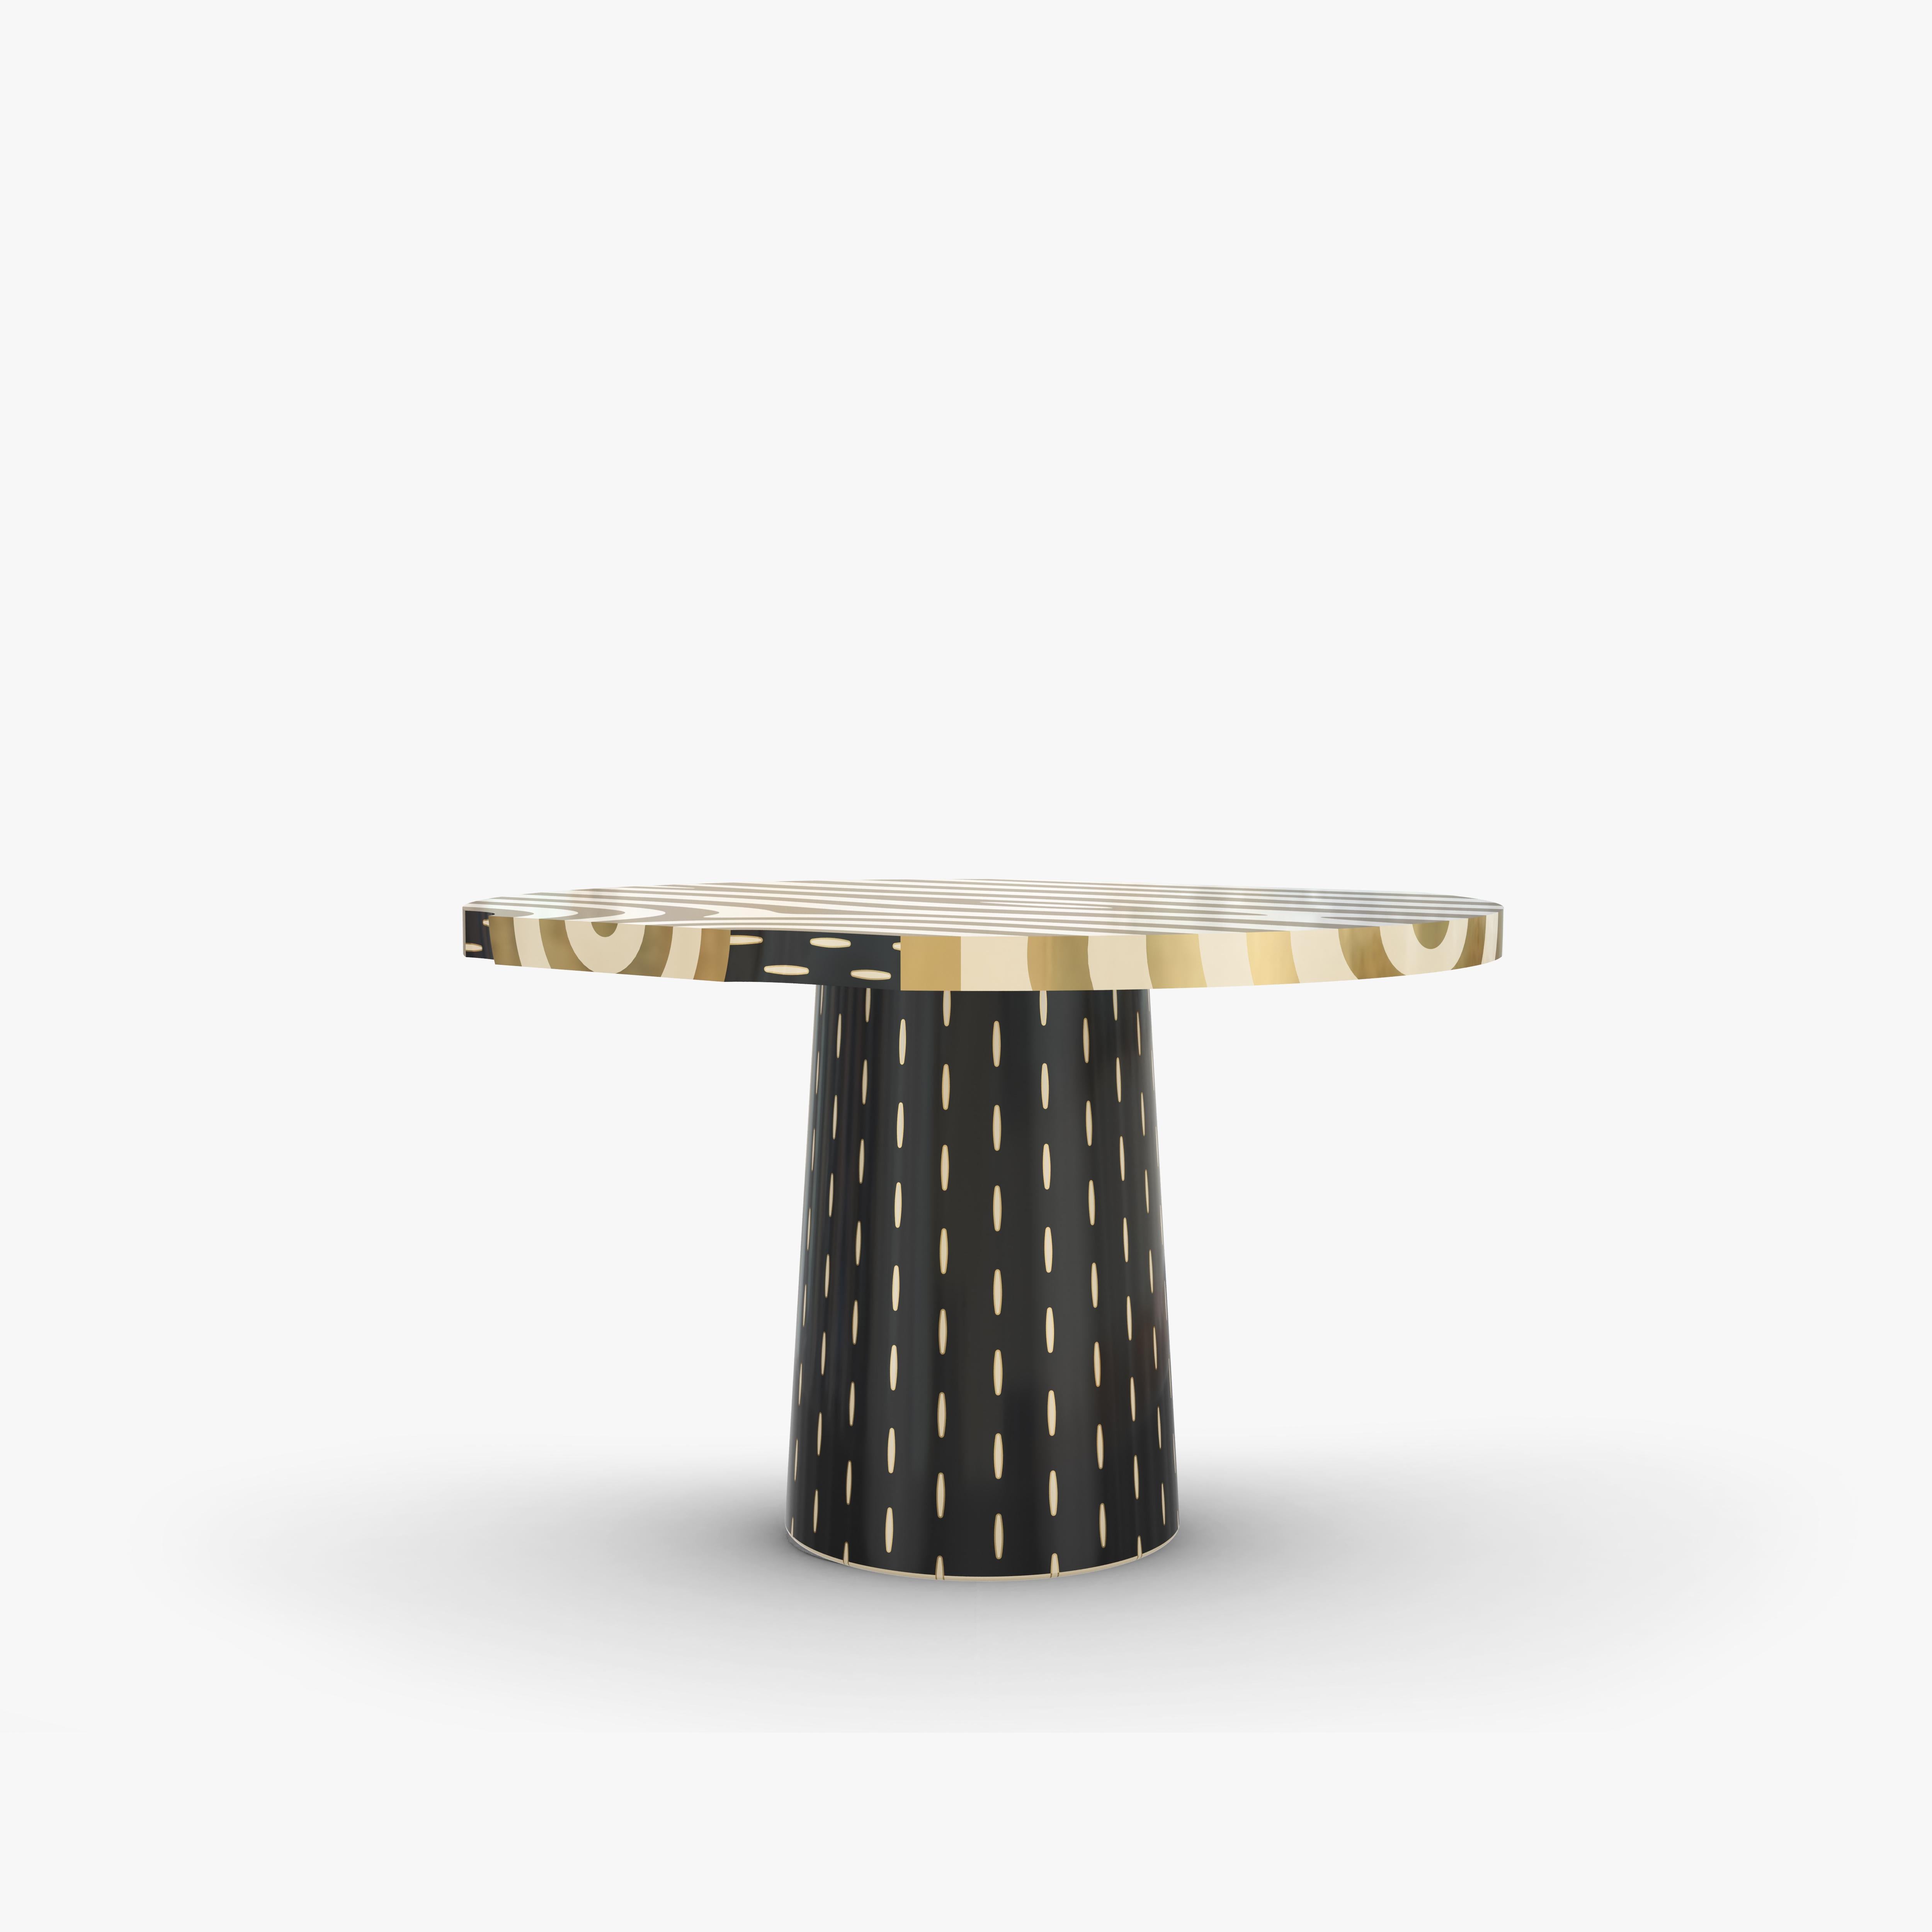 Brass inlay resembles the natural beauty of wood on the top of Forest Round Dining Table, which is poised on a lovely handcrafted base with brass details

For his debut creations, Marcantonio introduced “Vegetal Animal”, a concept that evokes